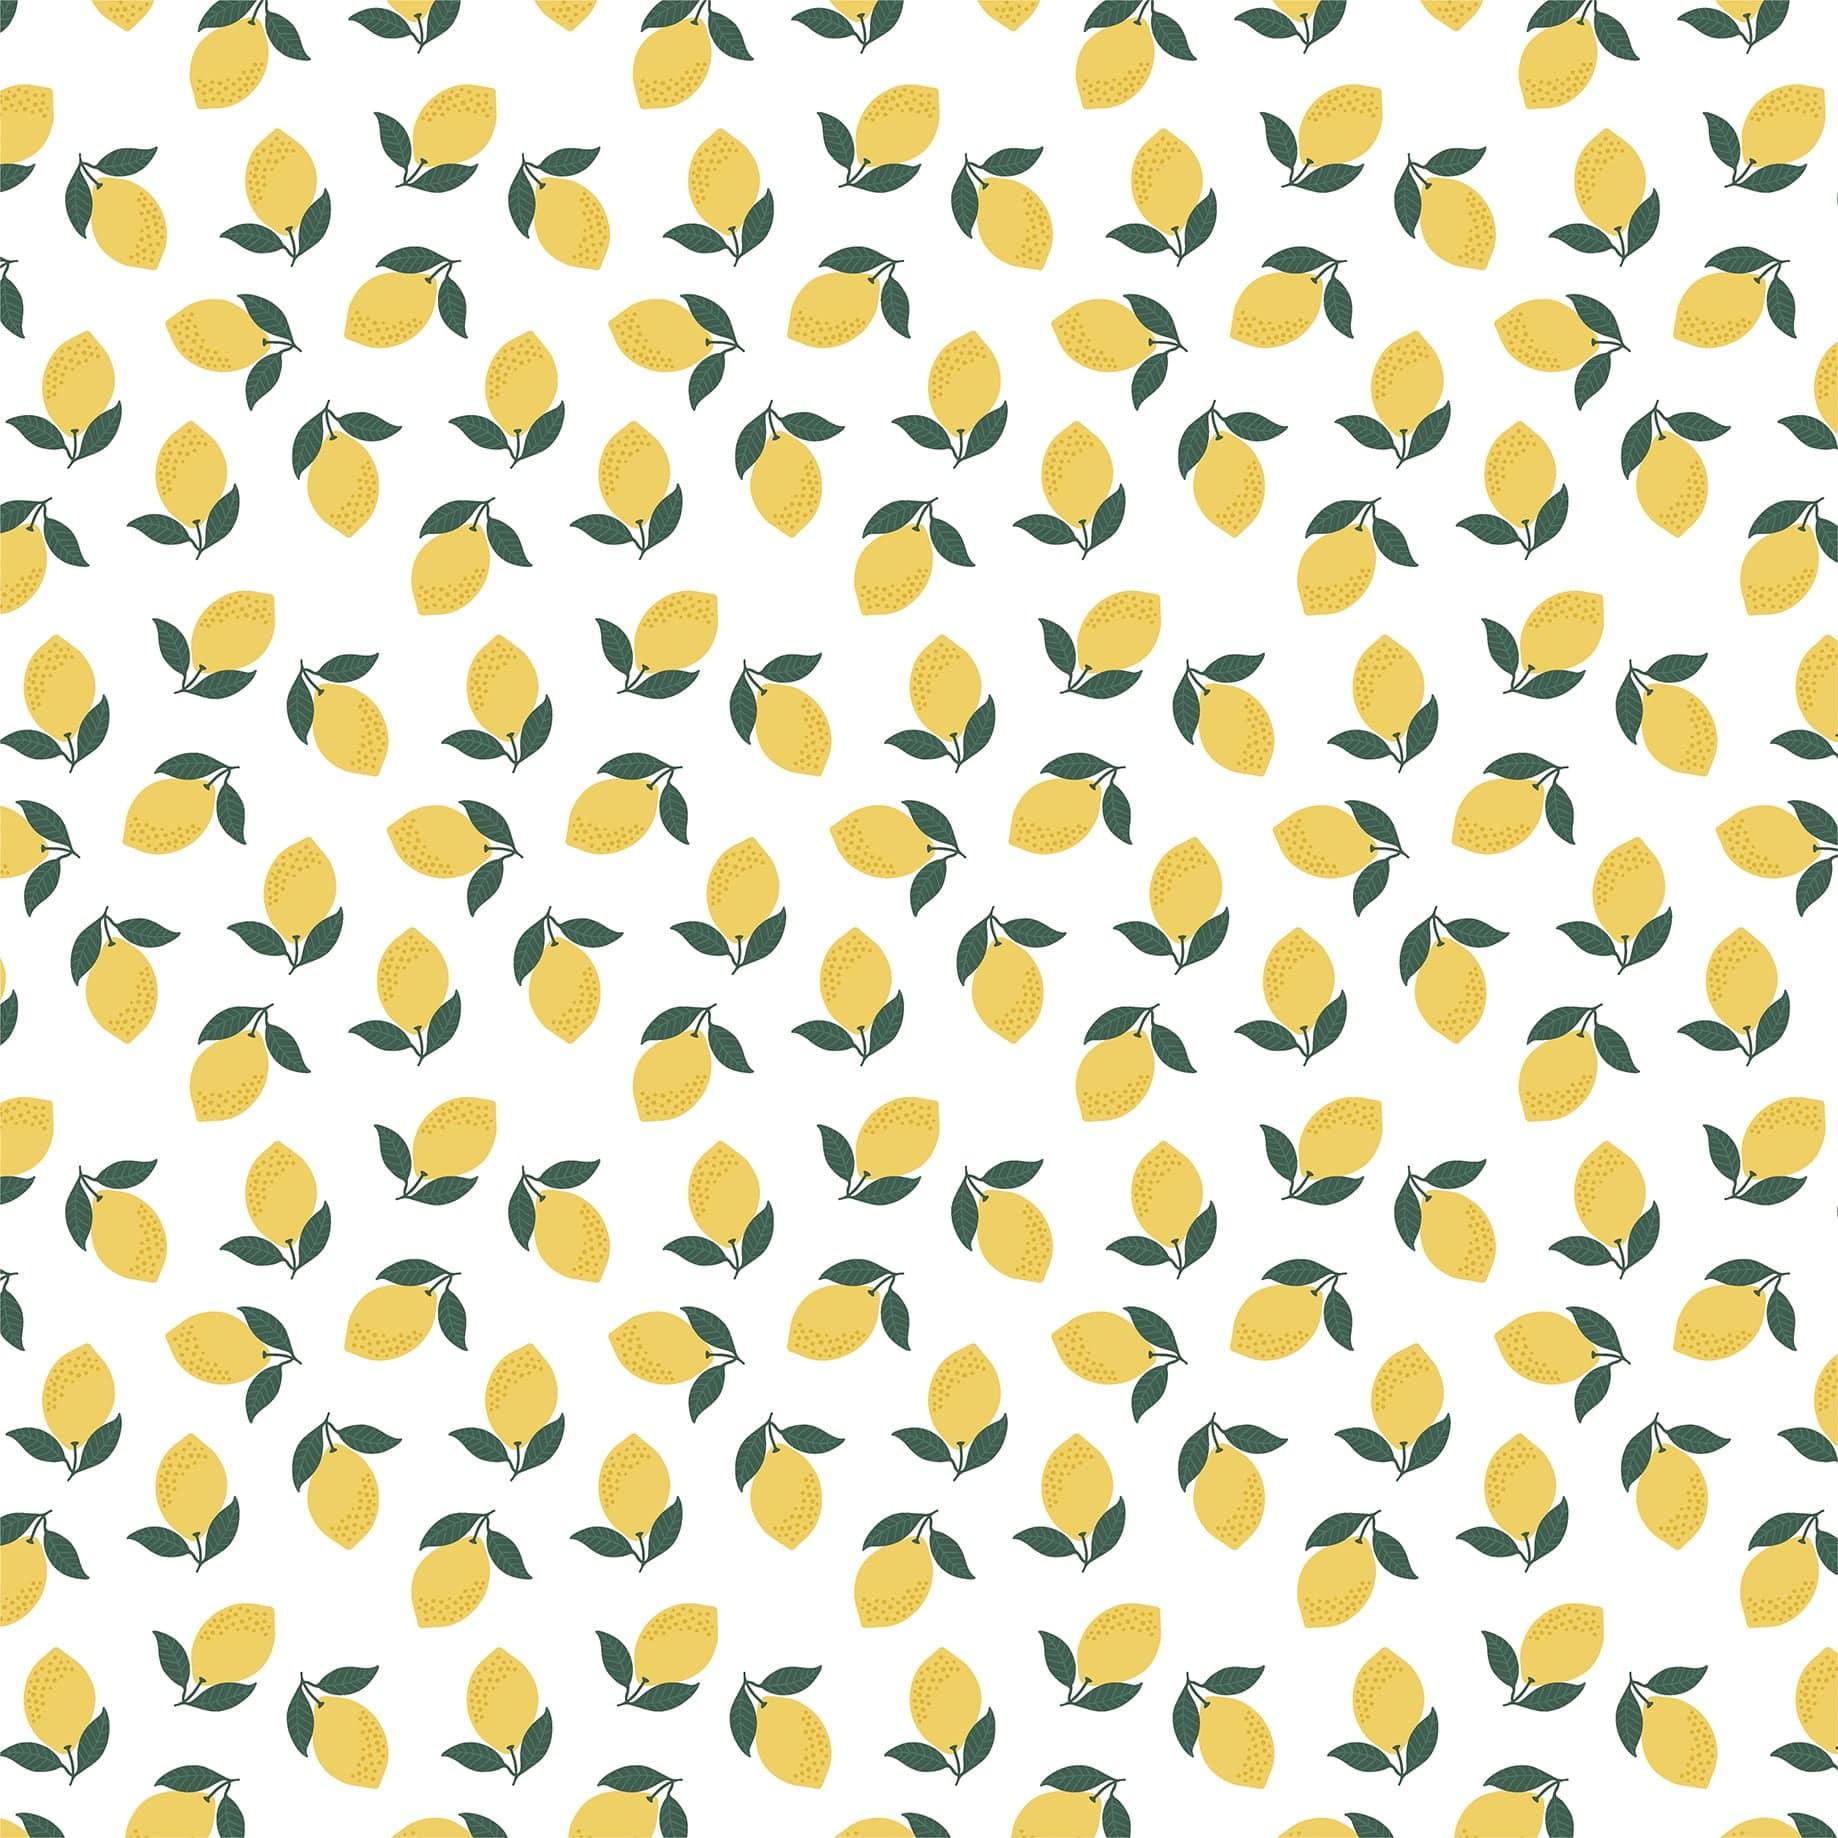 Pool Party Collection Make Lemonade 12 x 12 Double-Sided Scrapbook Paper by Echo Park Paper - Scrapbook Supply Companies